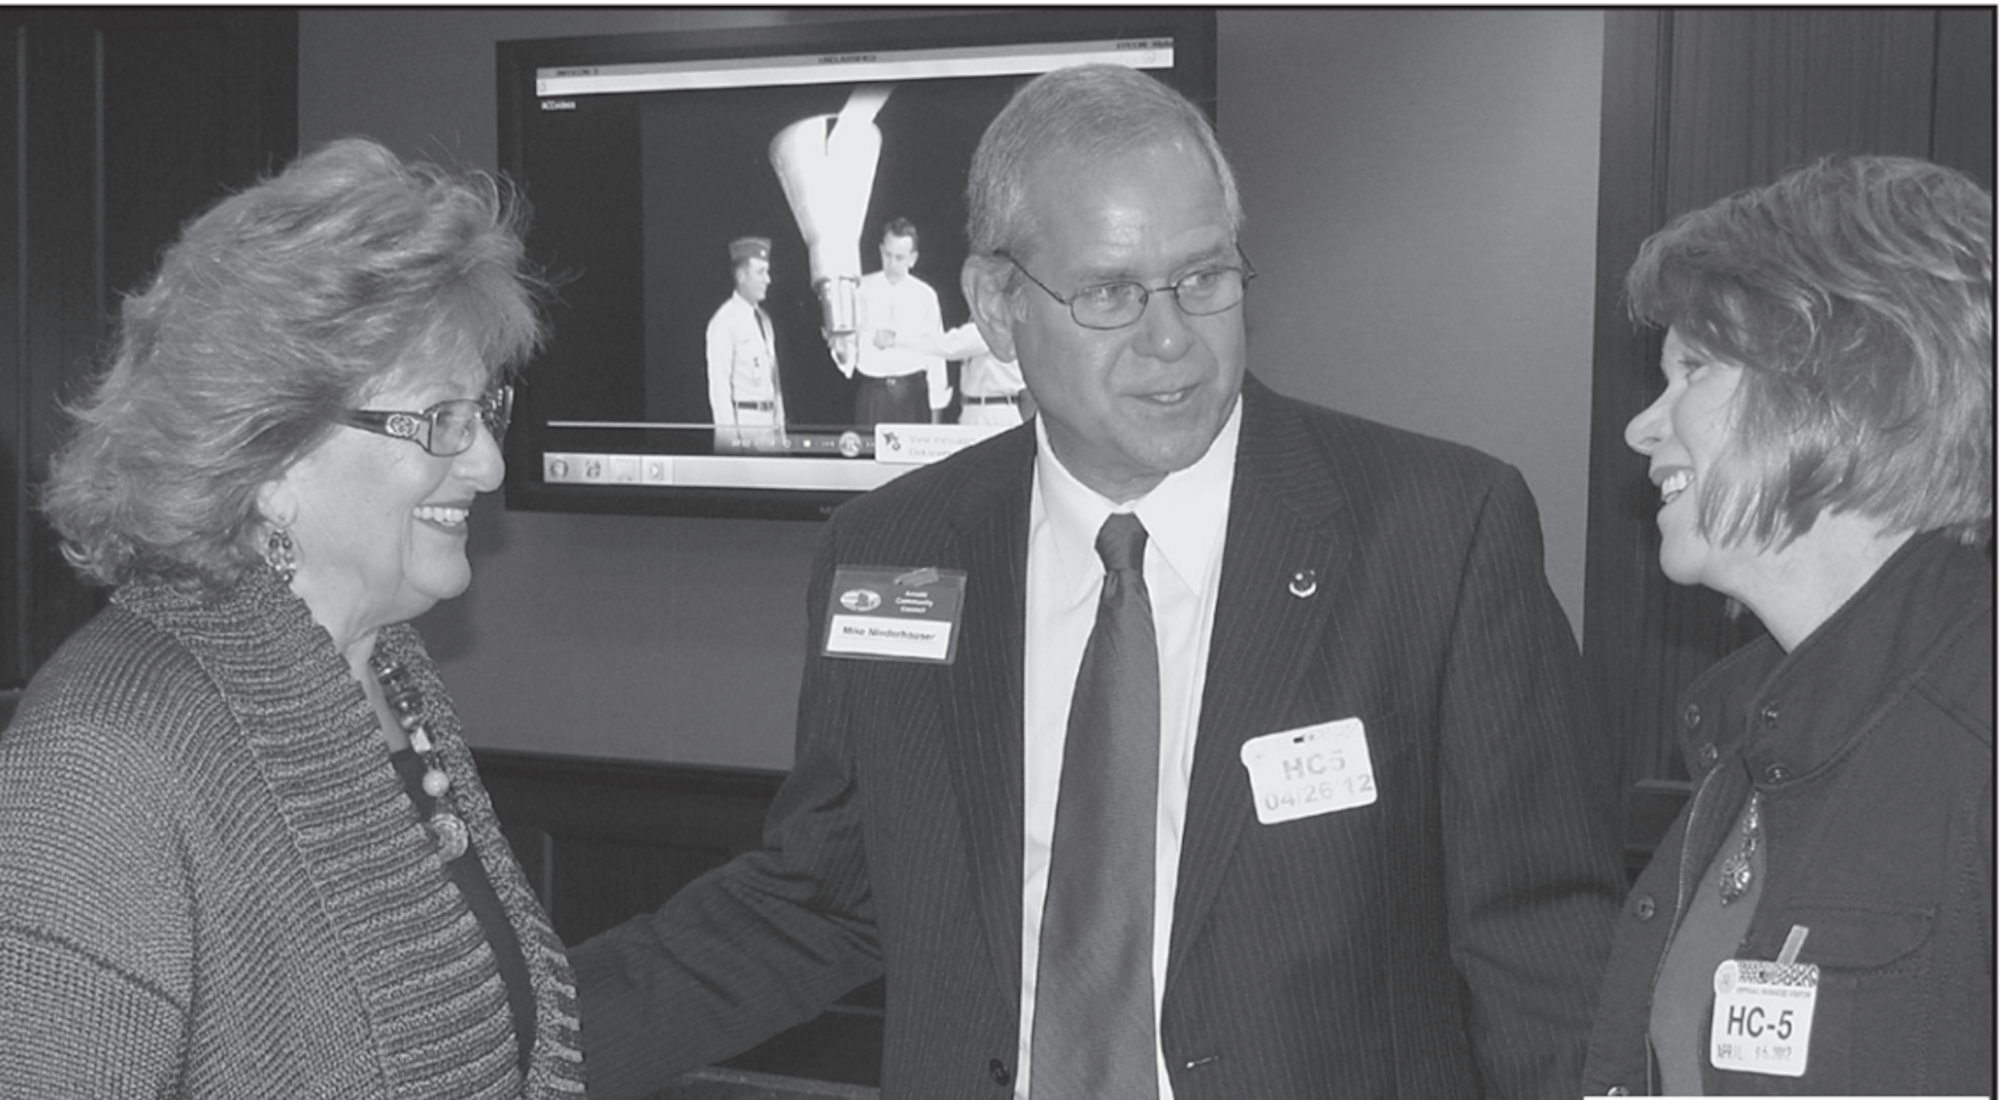 In a photo taken in 2012, Mike Niederhauser, ACC community relations and public service chair, introduces then-6th District Congresswoman Diane Black, left, to Cathy Hart, director-at-large of the Antelope Valley Board of Trade. (Courtesy photo)